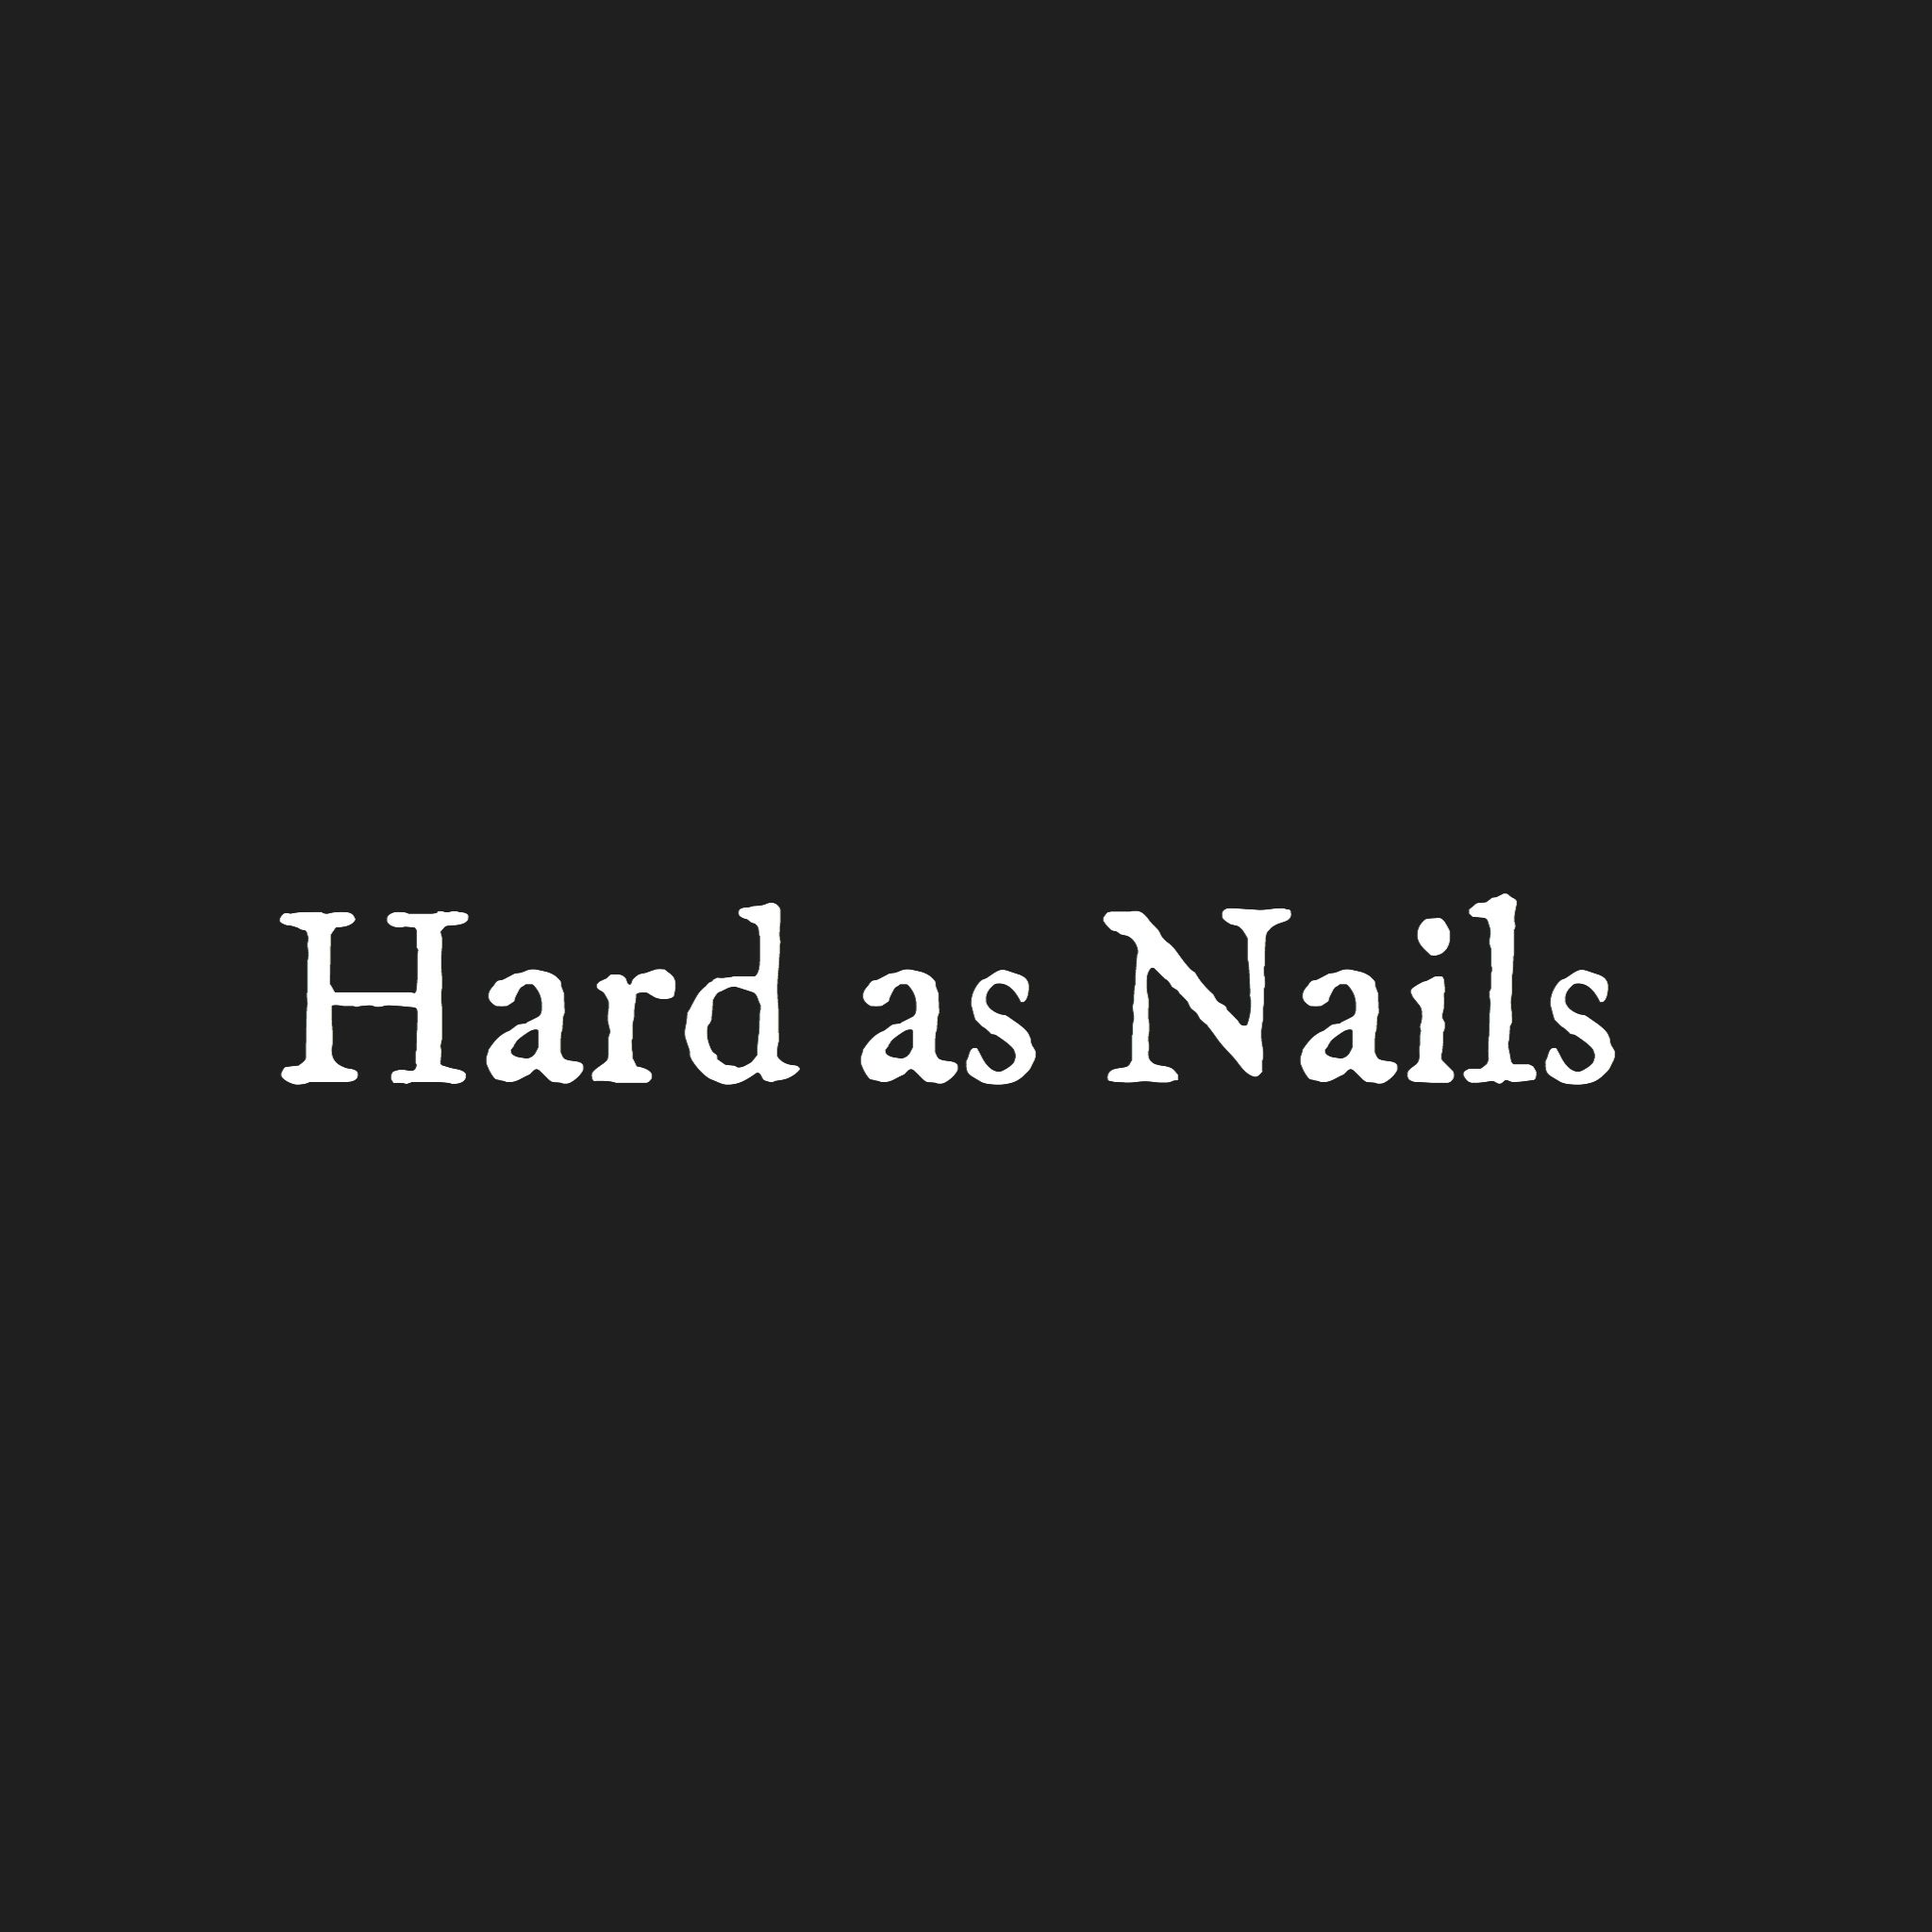 Hard as Nails by Outsider.ie